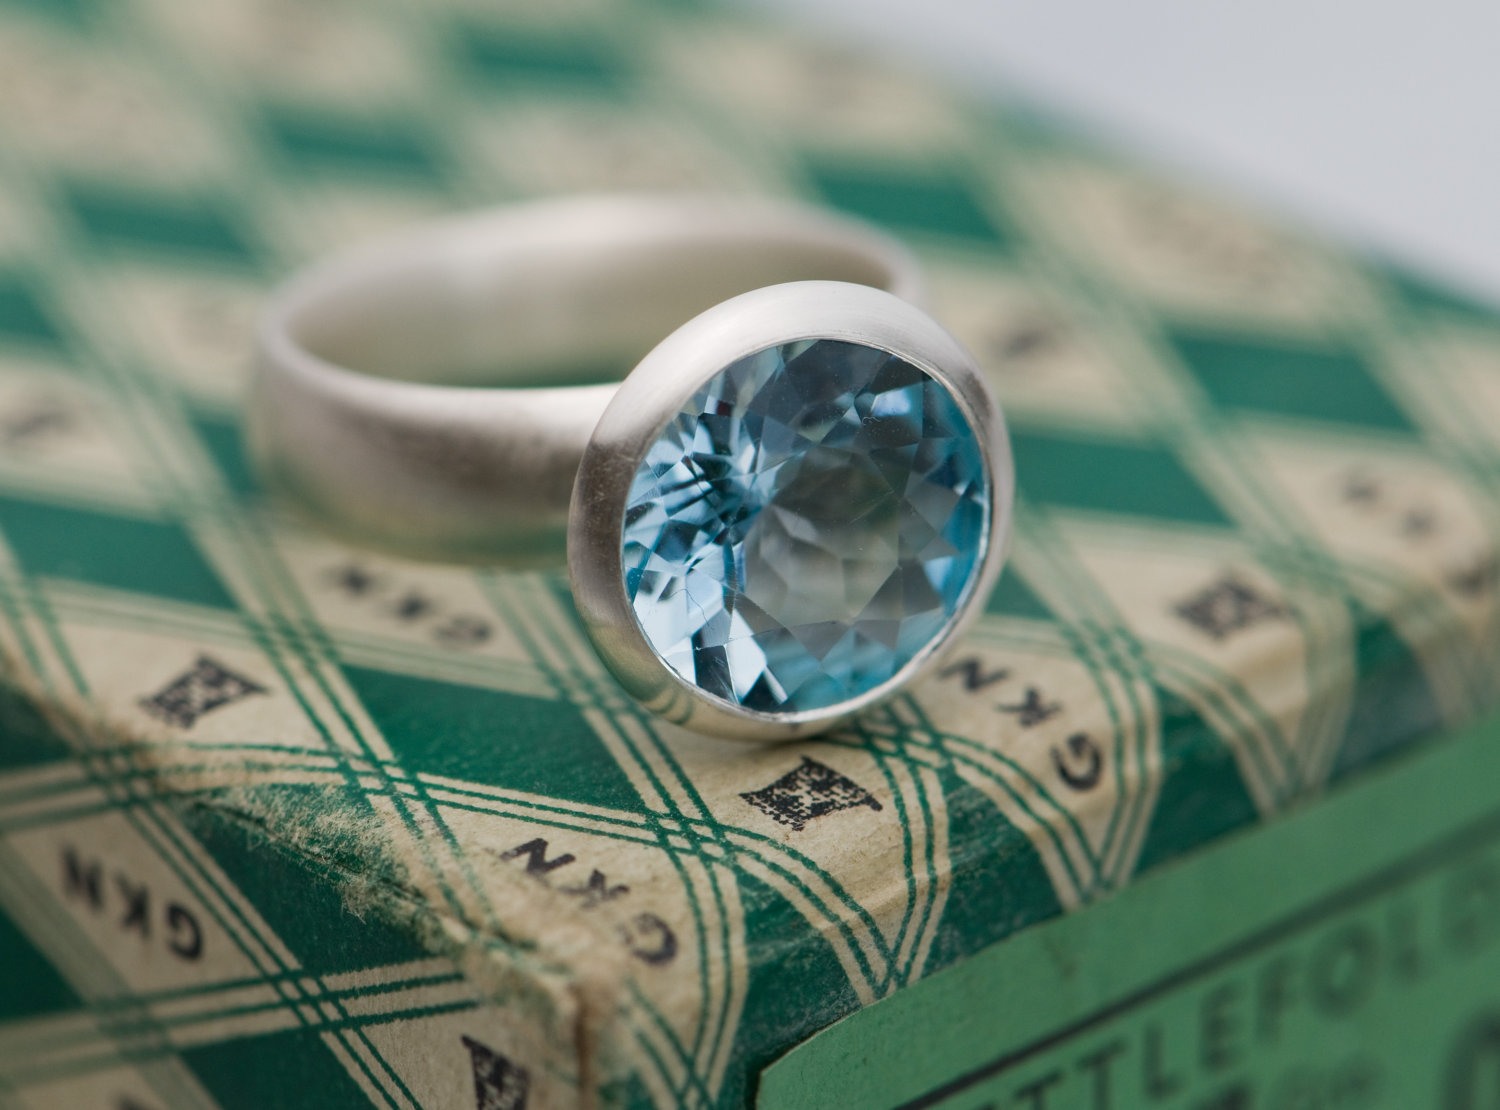 Large sky blue topaz stone set in silver ring